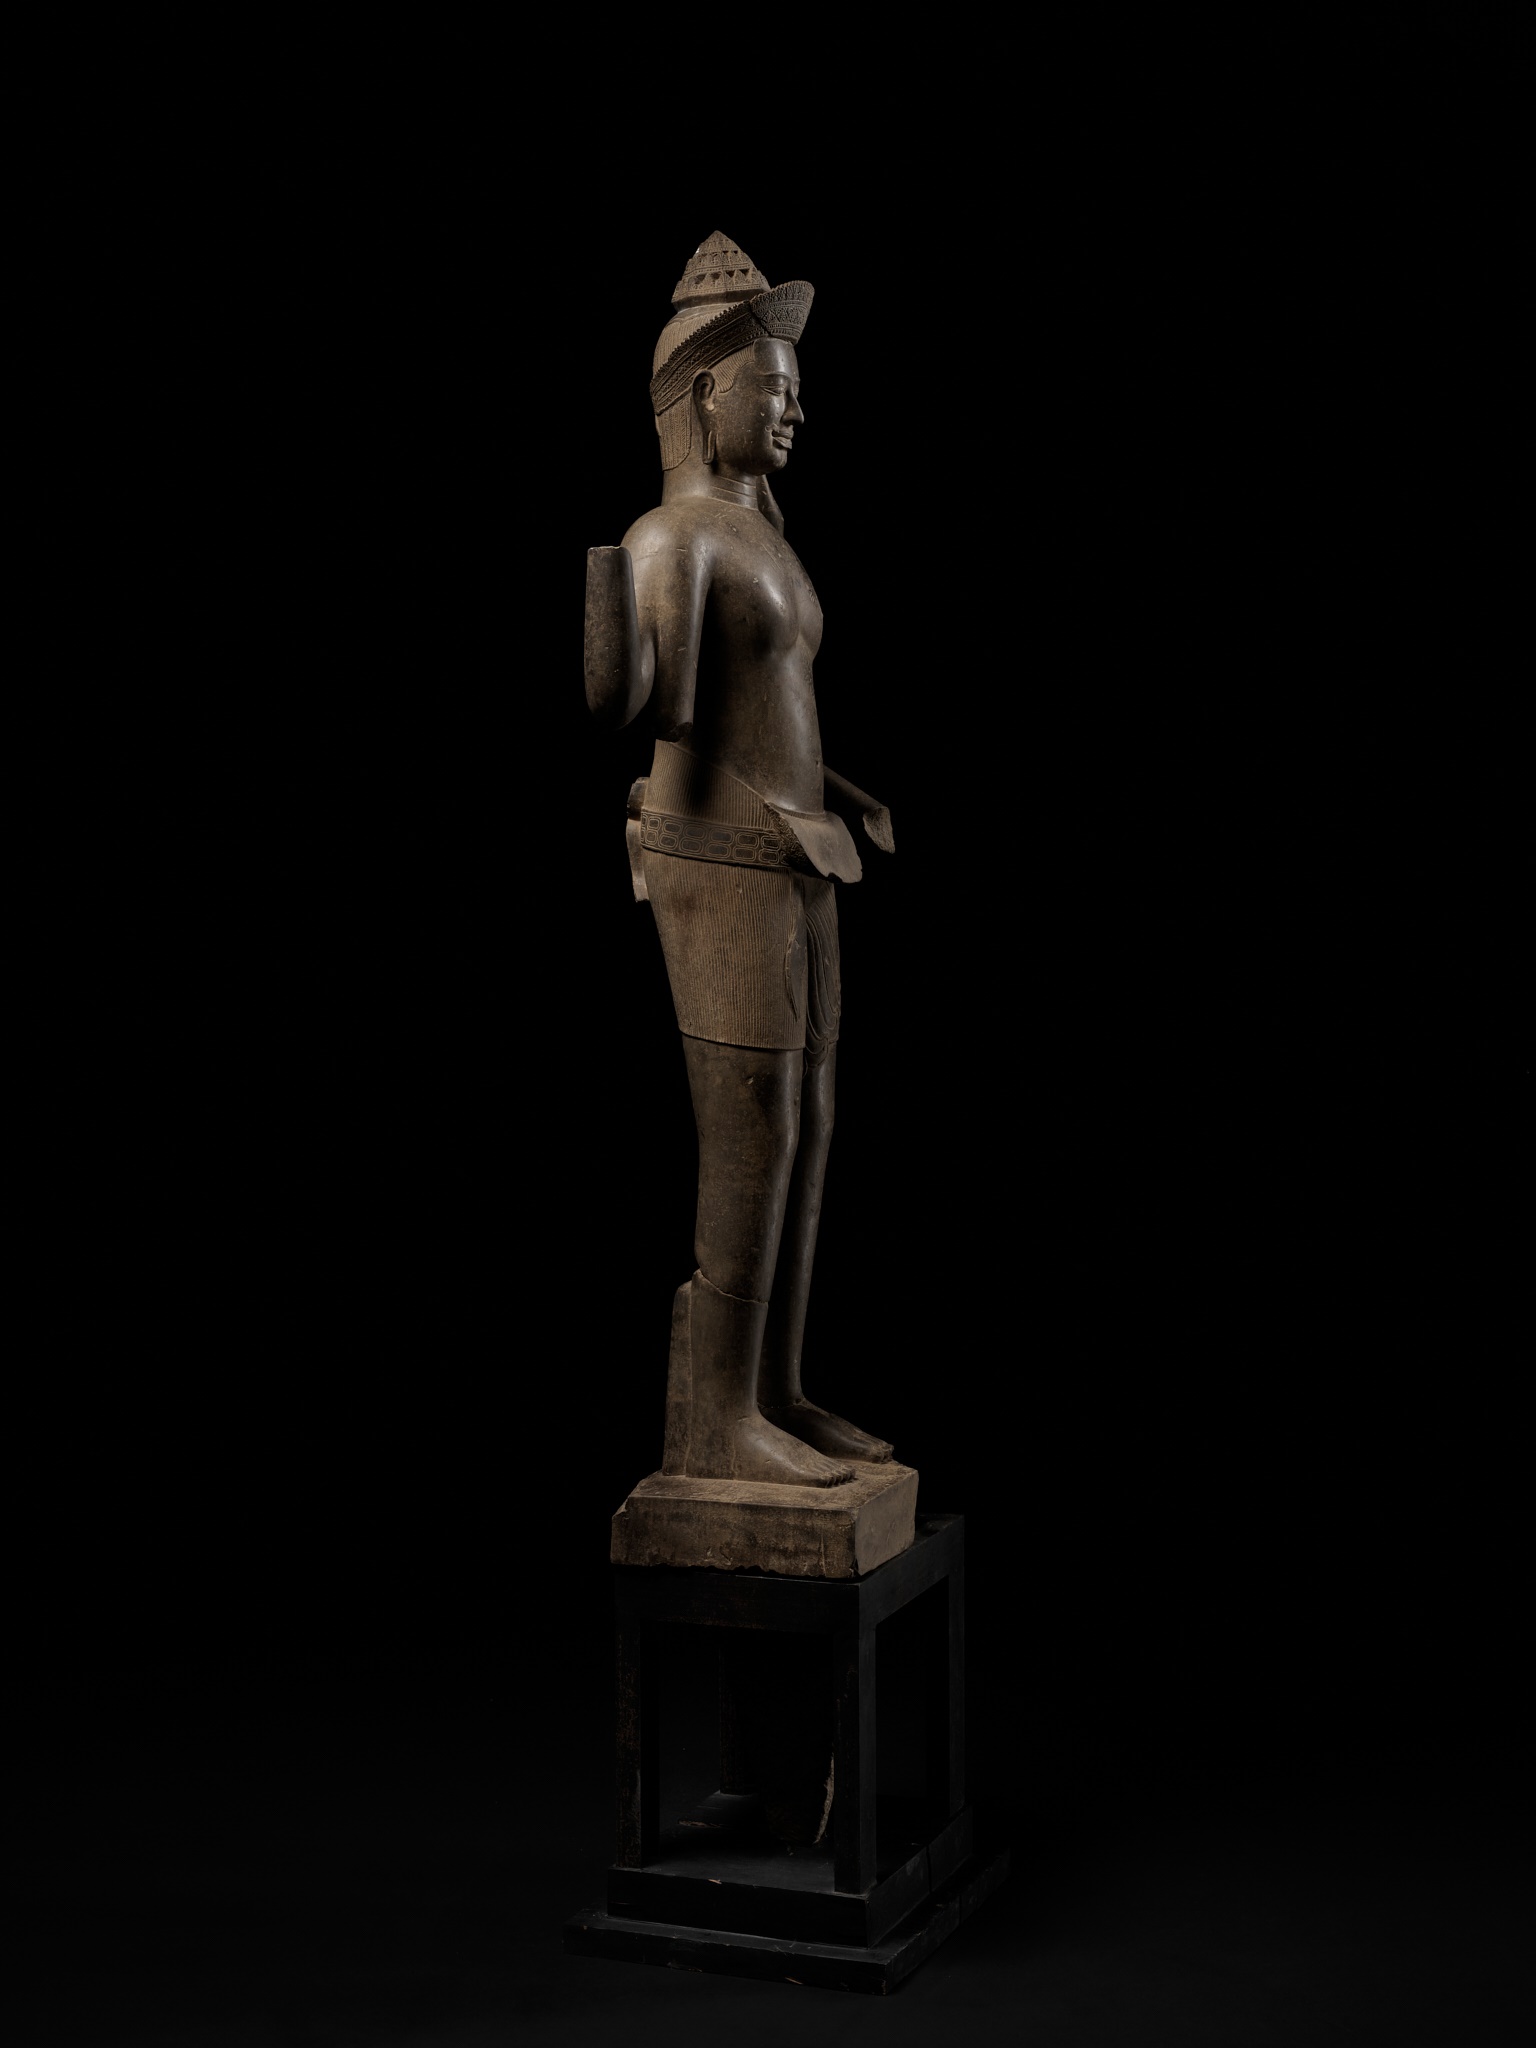 AN EXTREMELY RARE AND MONUMENTAL SANDSTONE STATUE OF VISHNU, ANGKOR PERIOD - Image 16 of 17